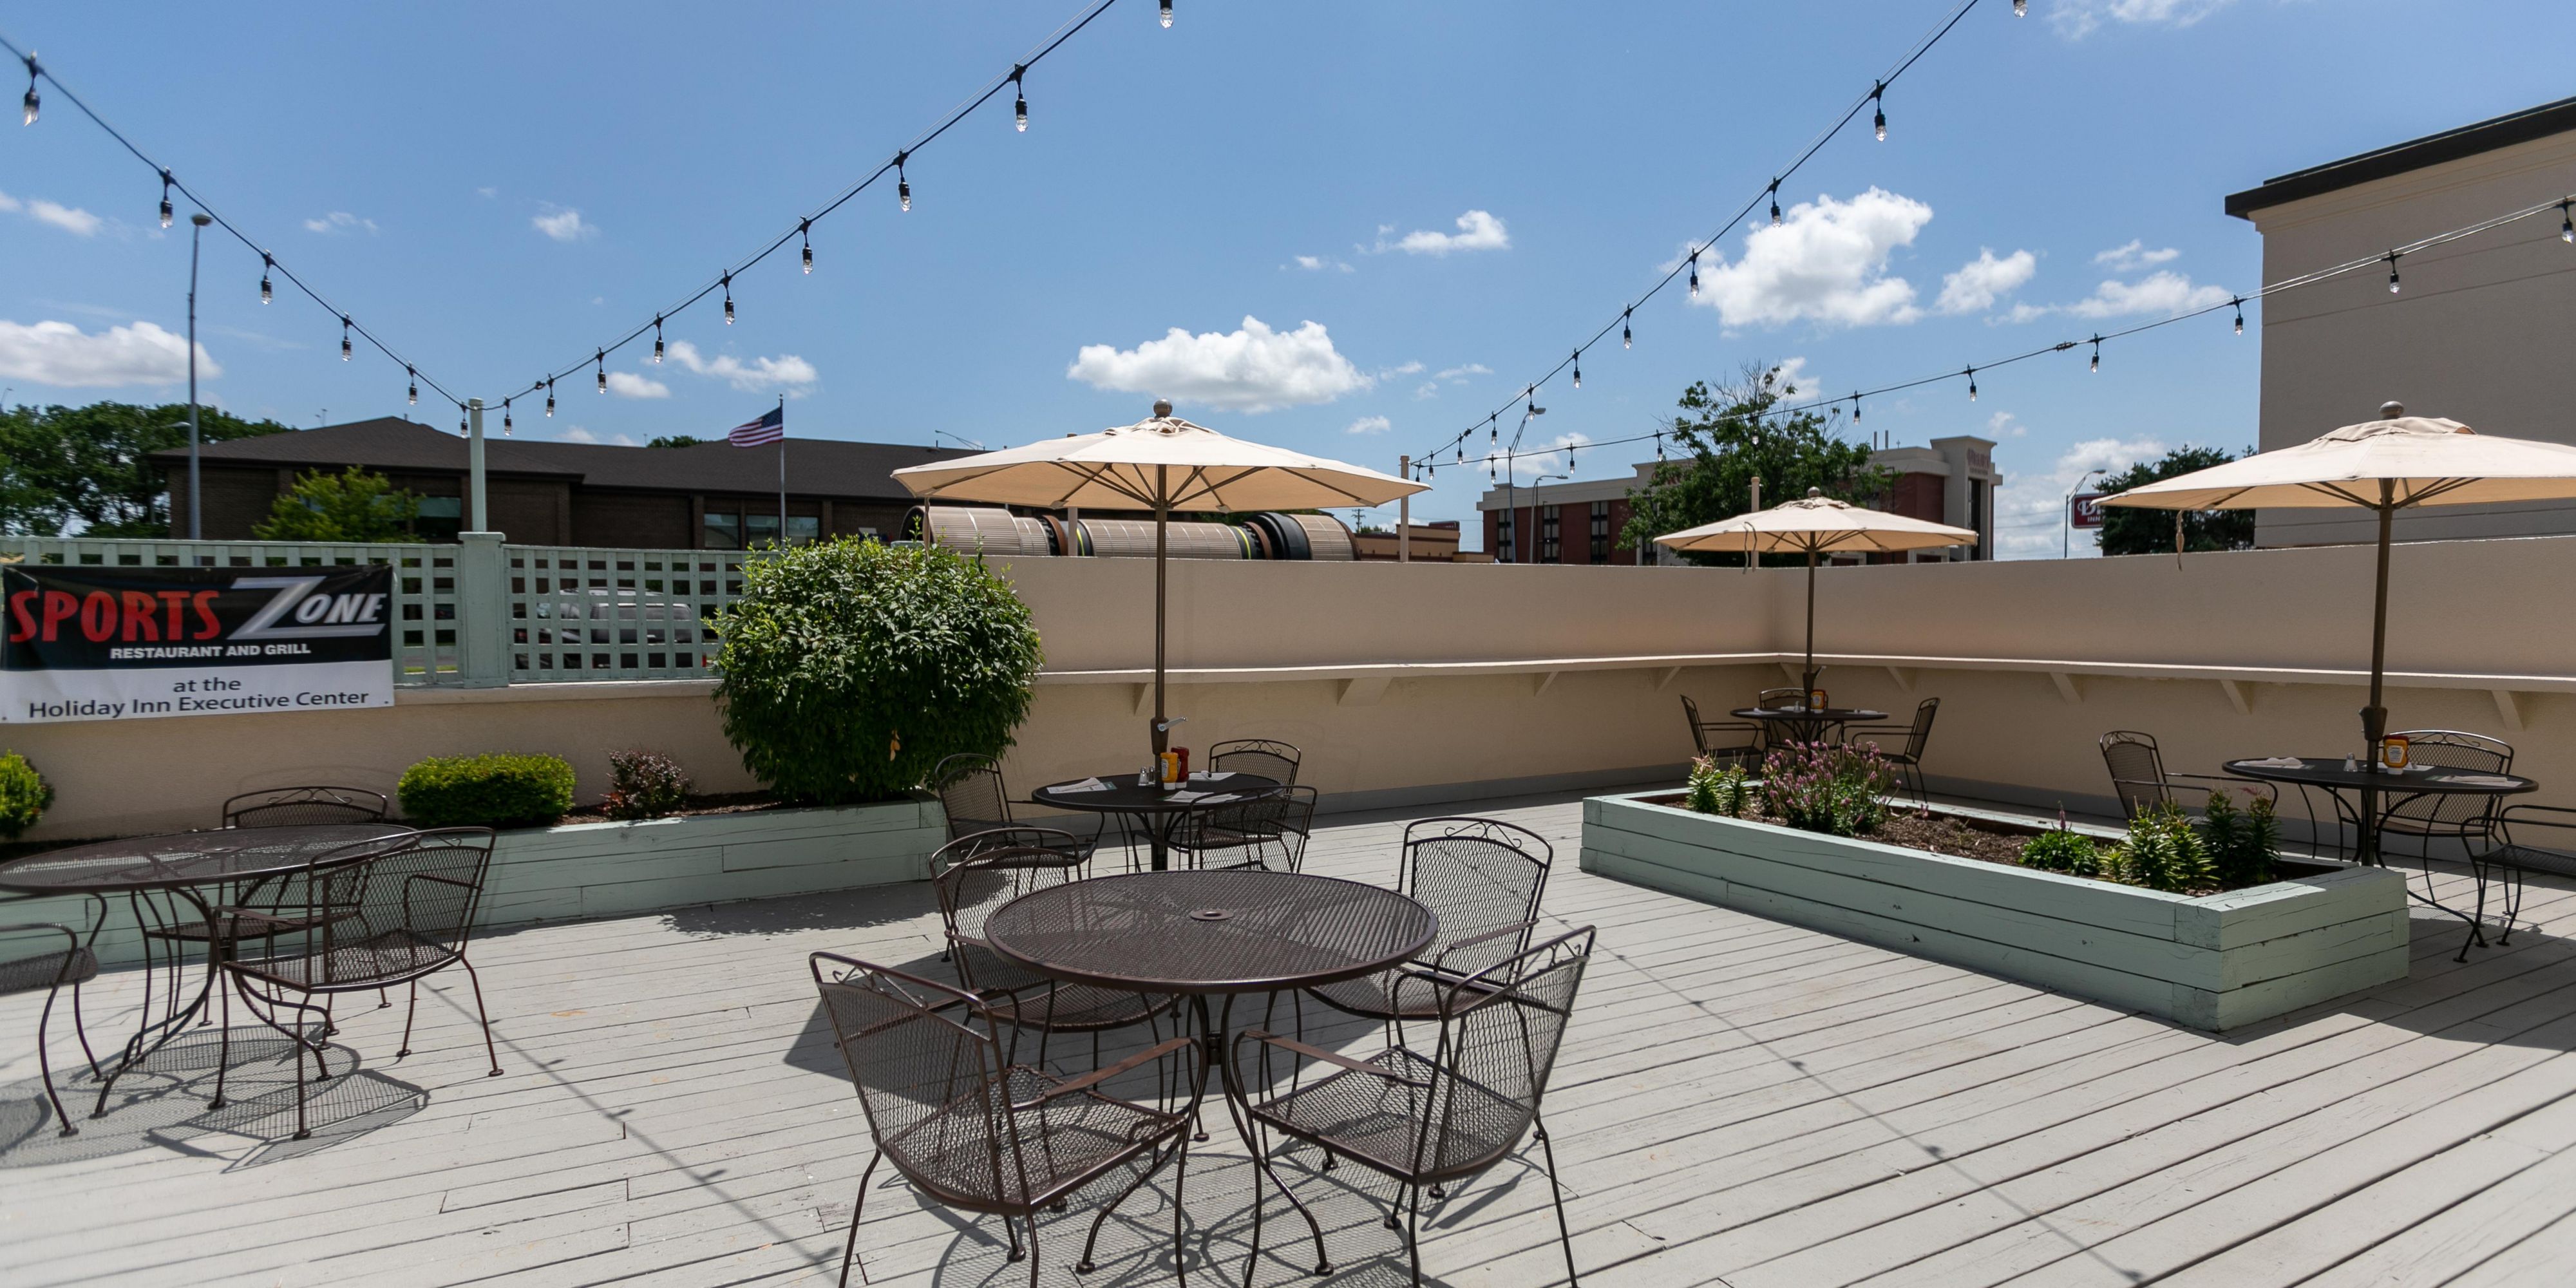 Check our website for live musical events on our patio.